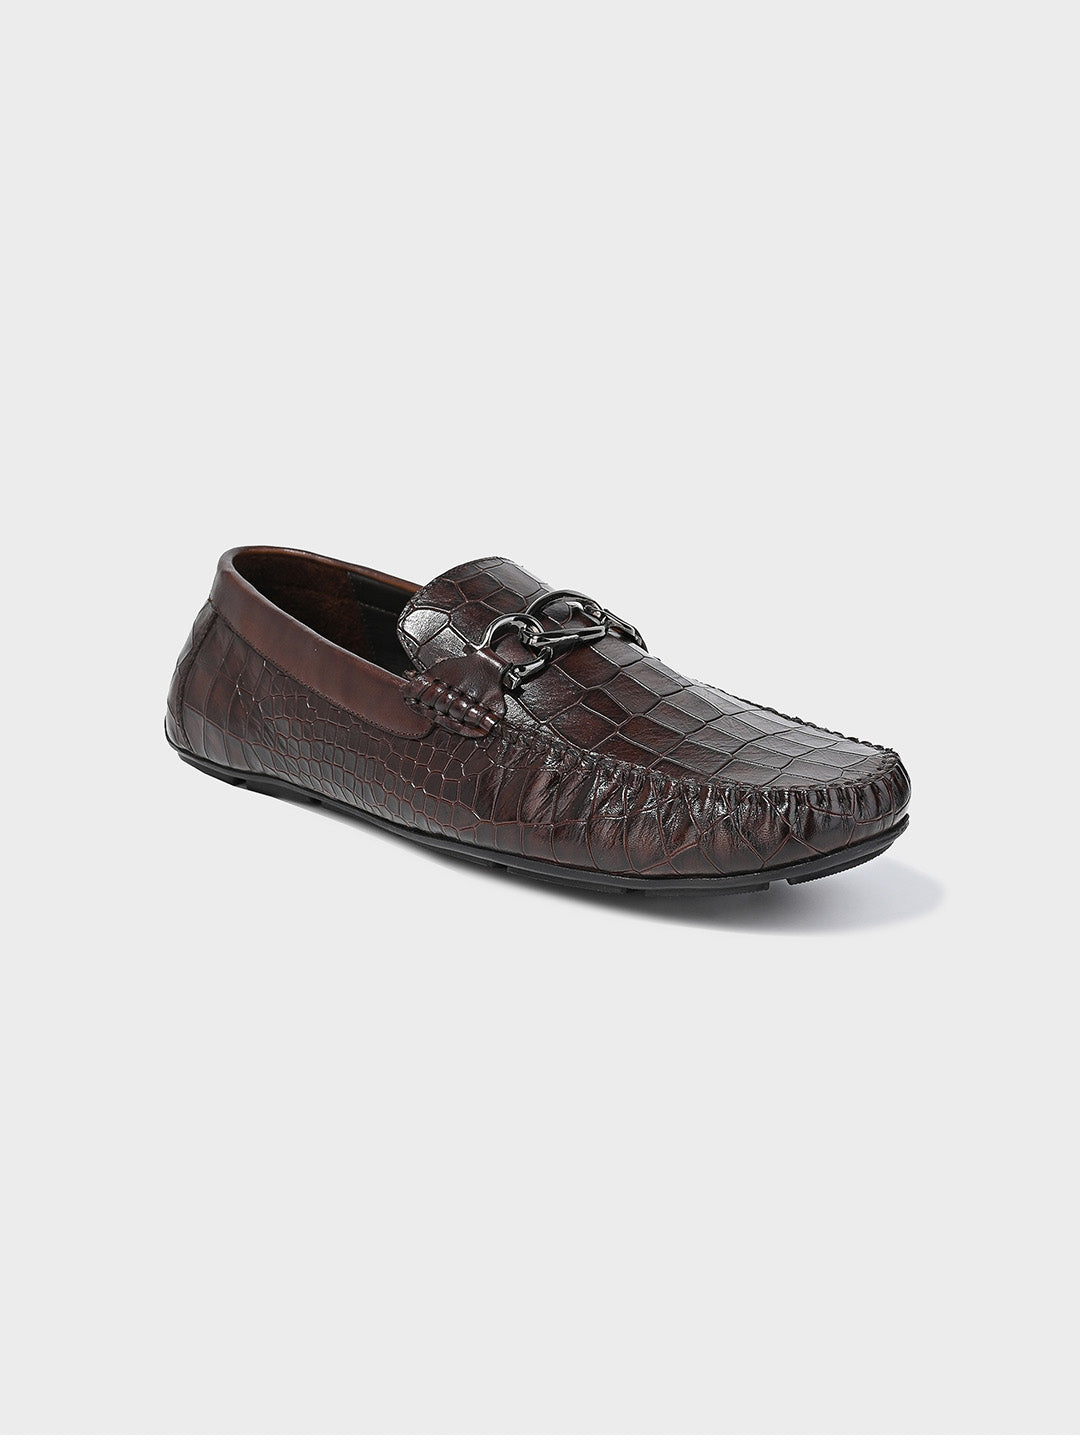 Classic Brown Leather Men's Slip-On Loafer Shoes